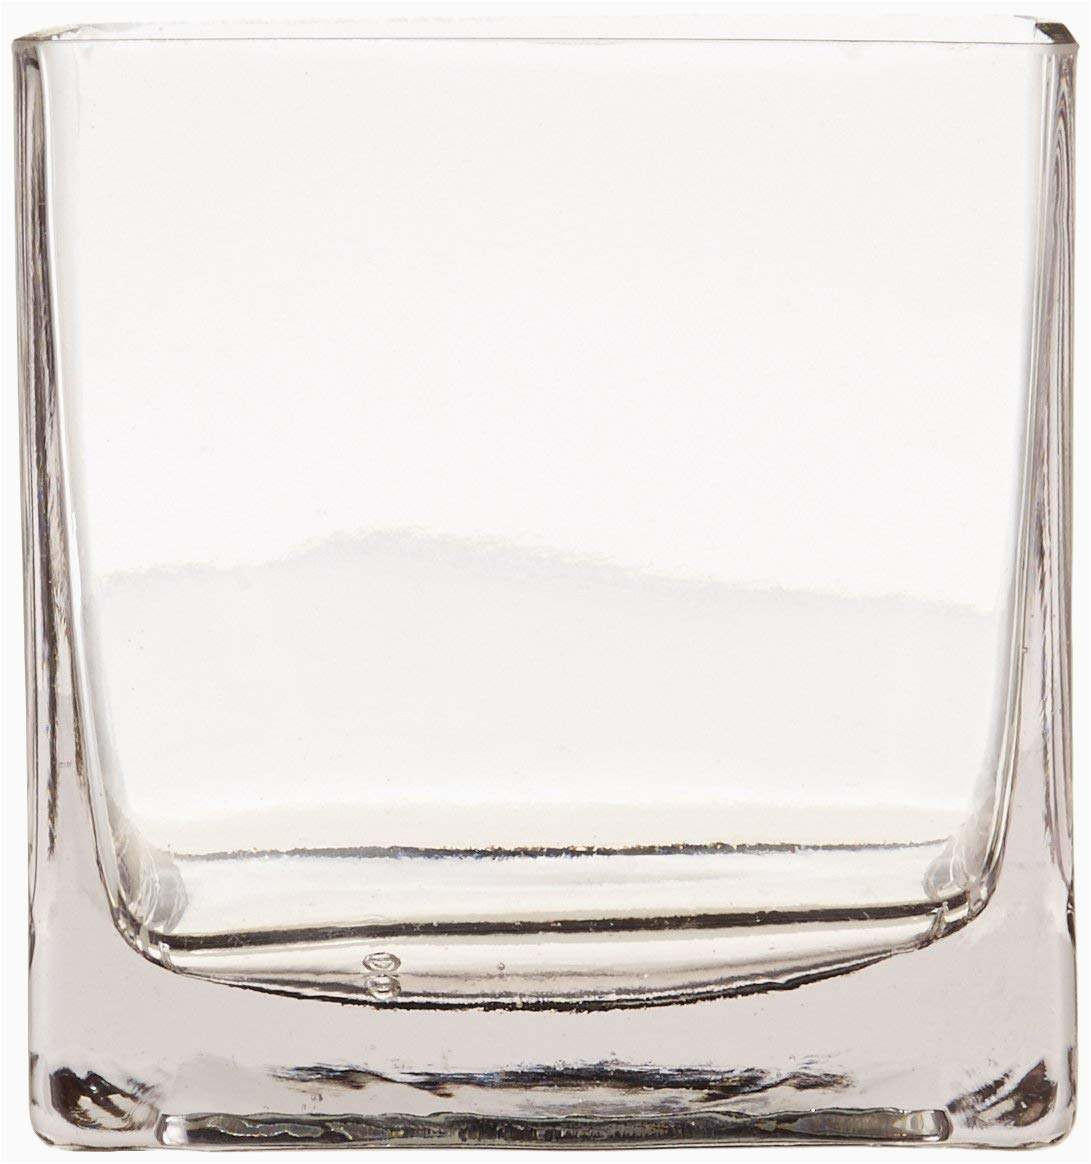 24 Awesome Square Glass Wall Vase 2022 free download square glass wall vase of clear flat glass ornaments gallery amazon 12piece 4 square crystal pertaining to clear flat glass ornaments photo amazon 12piece 4 square crystal clear glass vase h